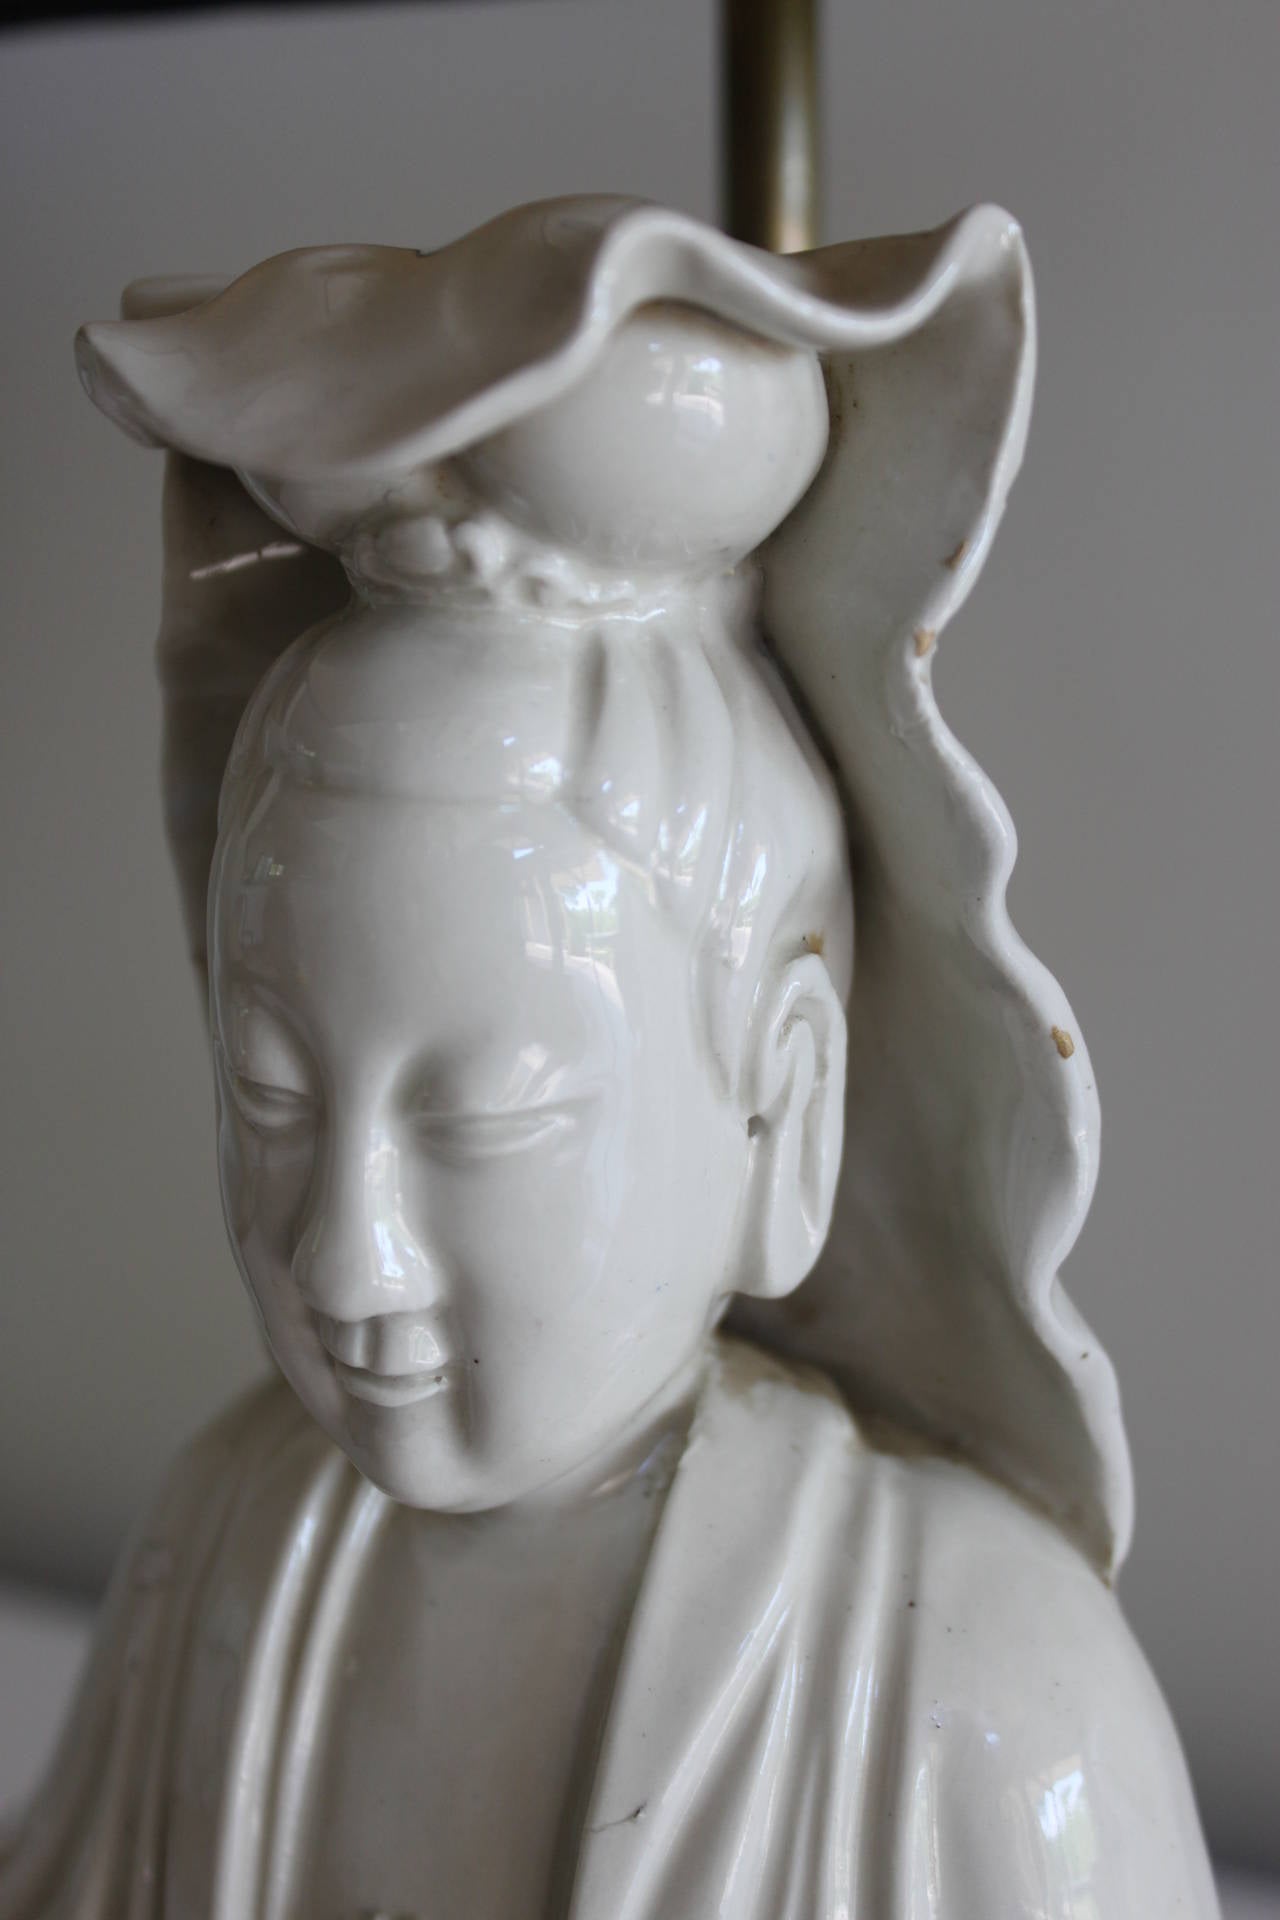 Blanc de Chine seated Kwan Yin or Buddha lamp on a vintage brass base. The figures are 19th century and were wired as lamps in the early 20th century. The figurine has not been drilled and is pushed porcelain. 
One lamp available


Lamps measure